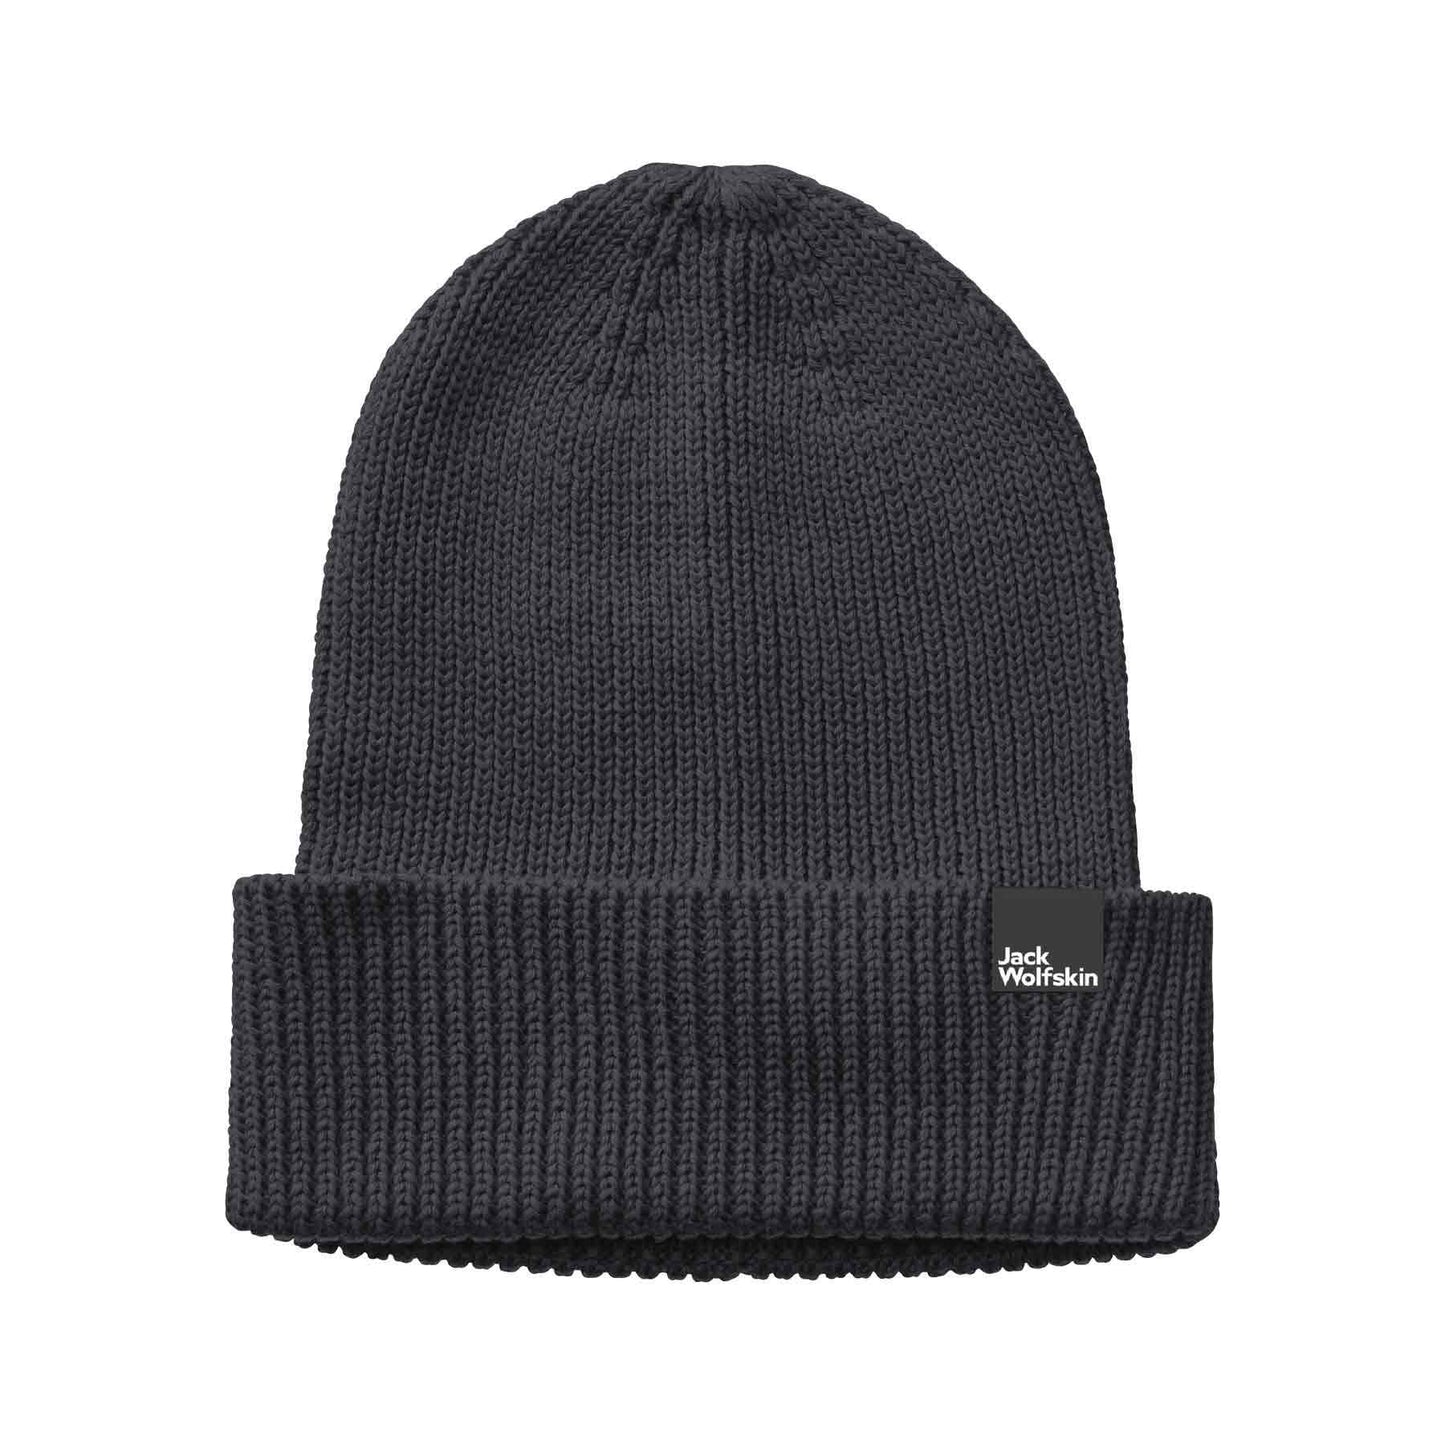 Essential Beanie by Jack Wolfskin - The Luxury Promotional Gifts Company Limited